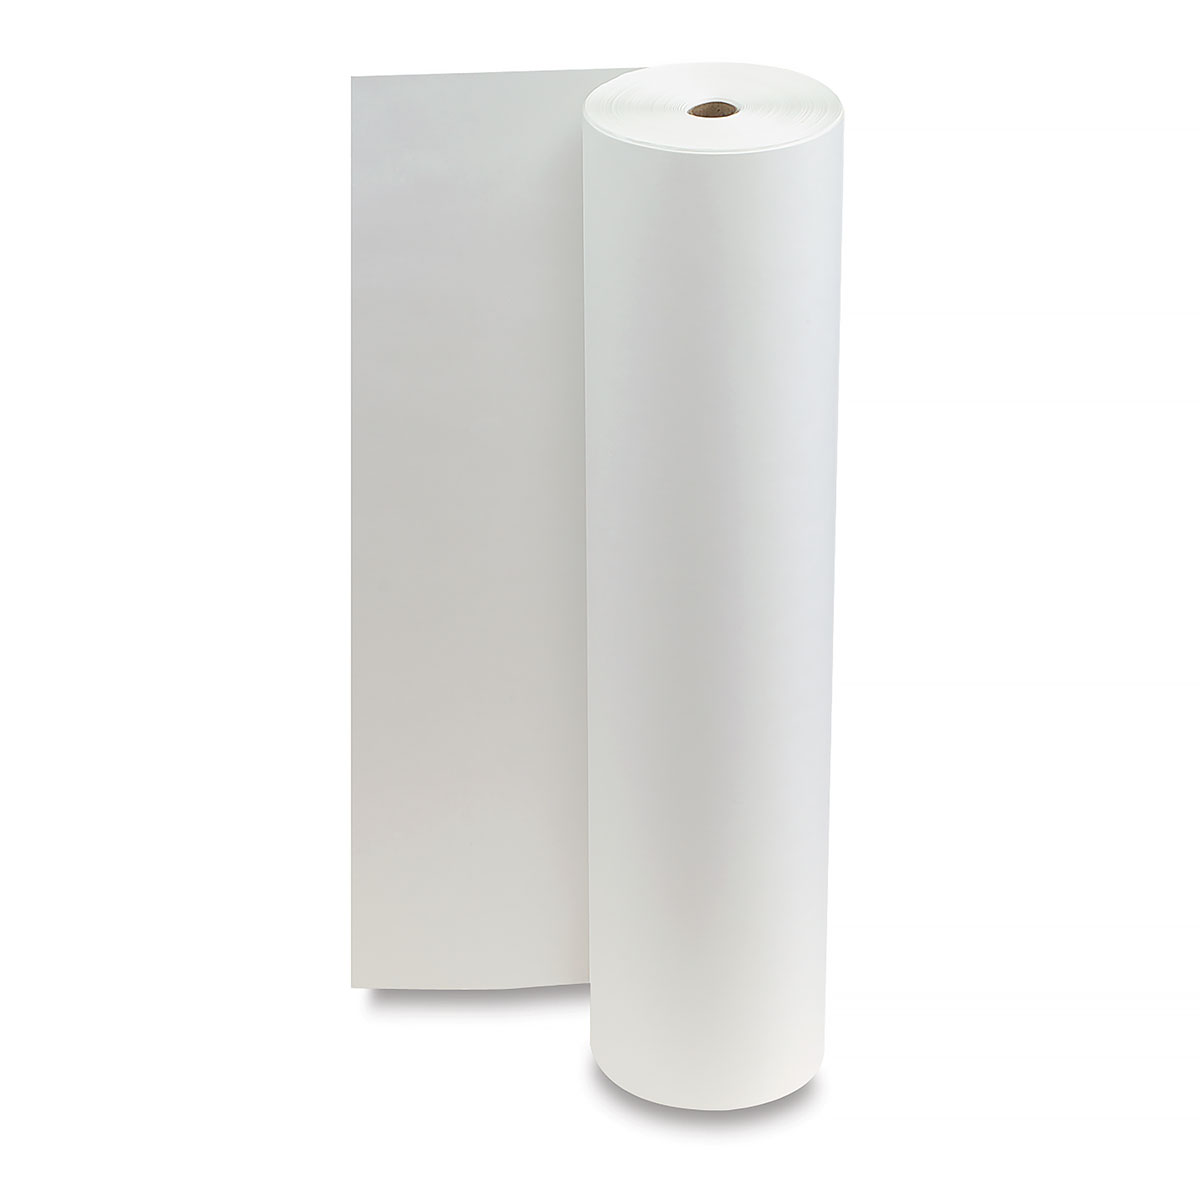 Pacon White Utility Paper Roll - 36 x 1000 ft, White, Roll